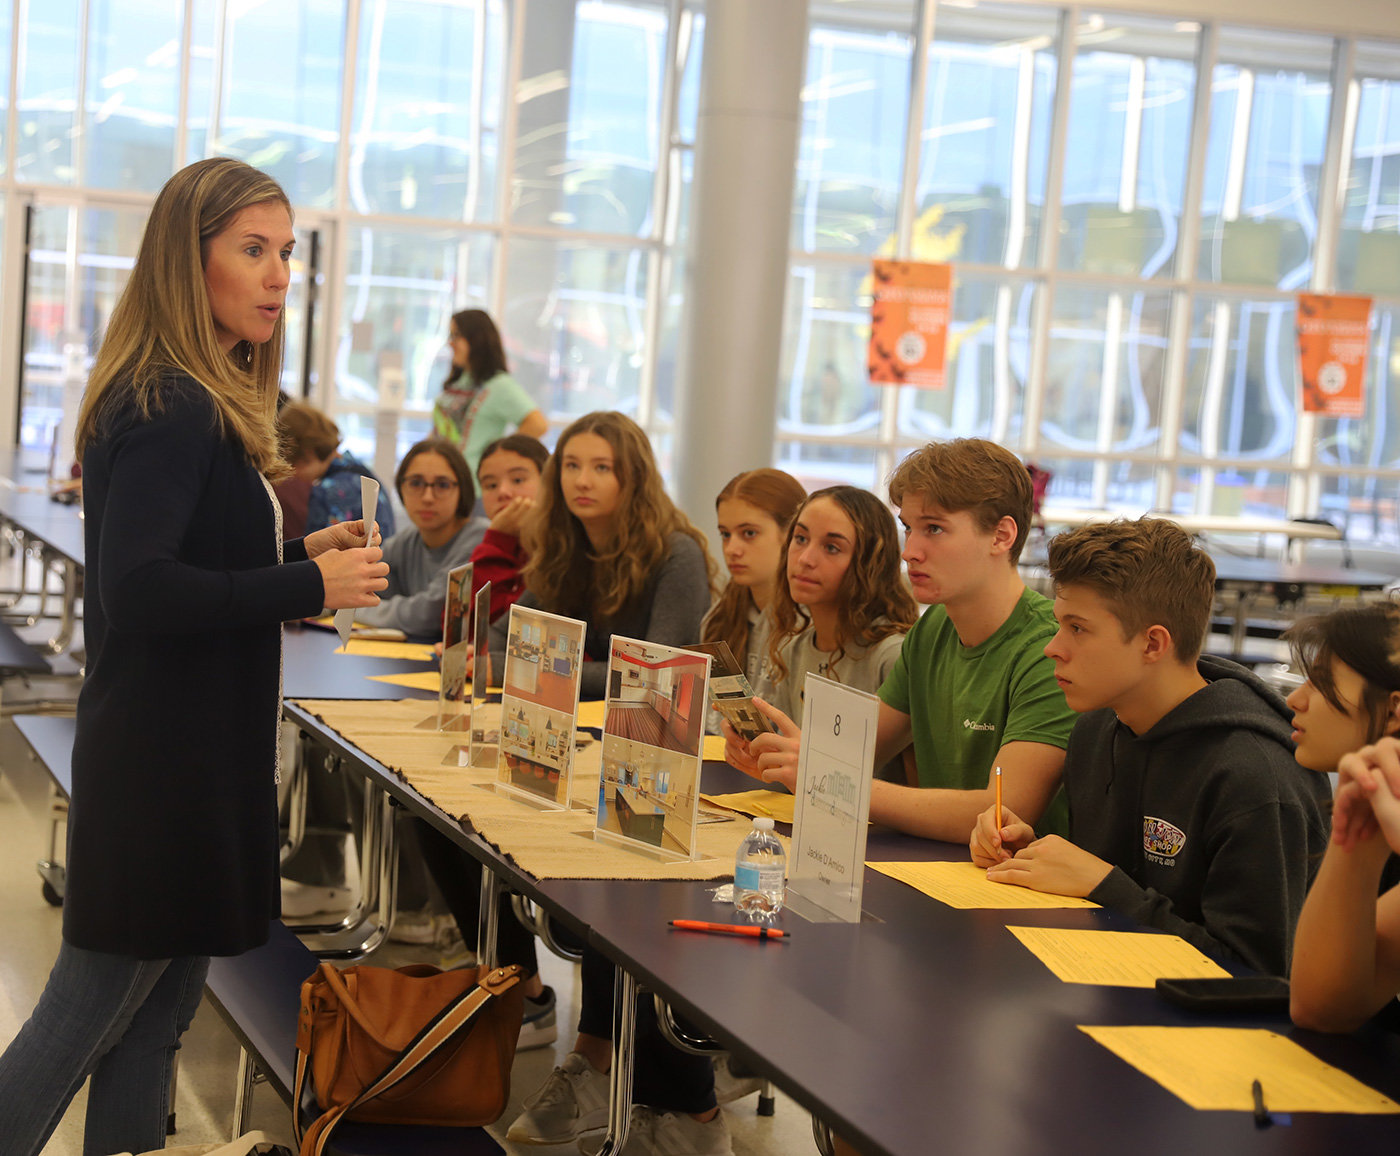 Jackie D’Amico told Severna Park High students about her interior design company, which specializes in remodeling kitchens and bathrooms.